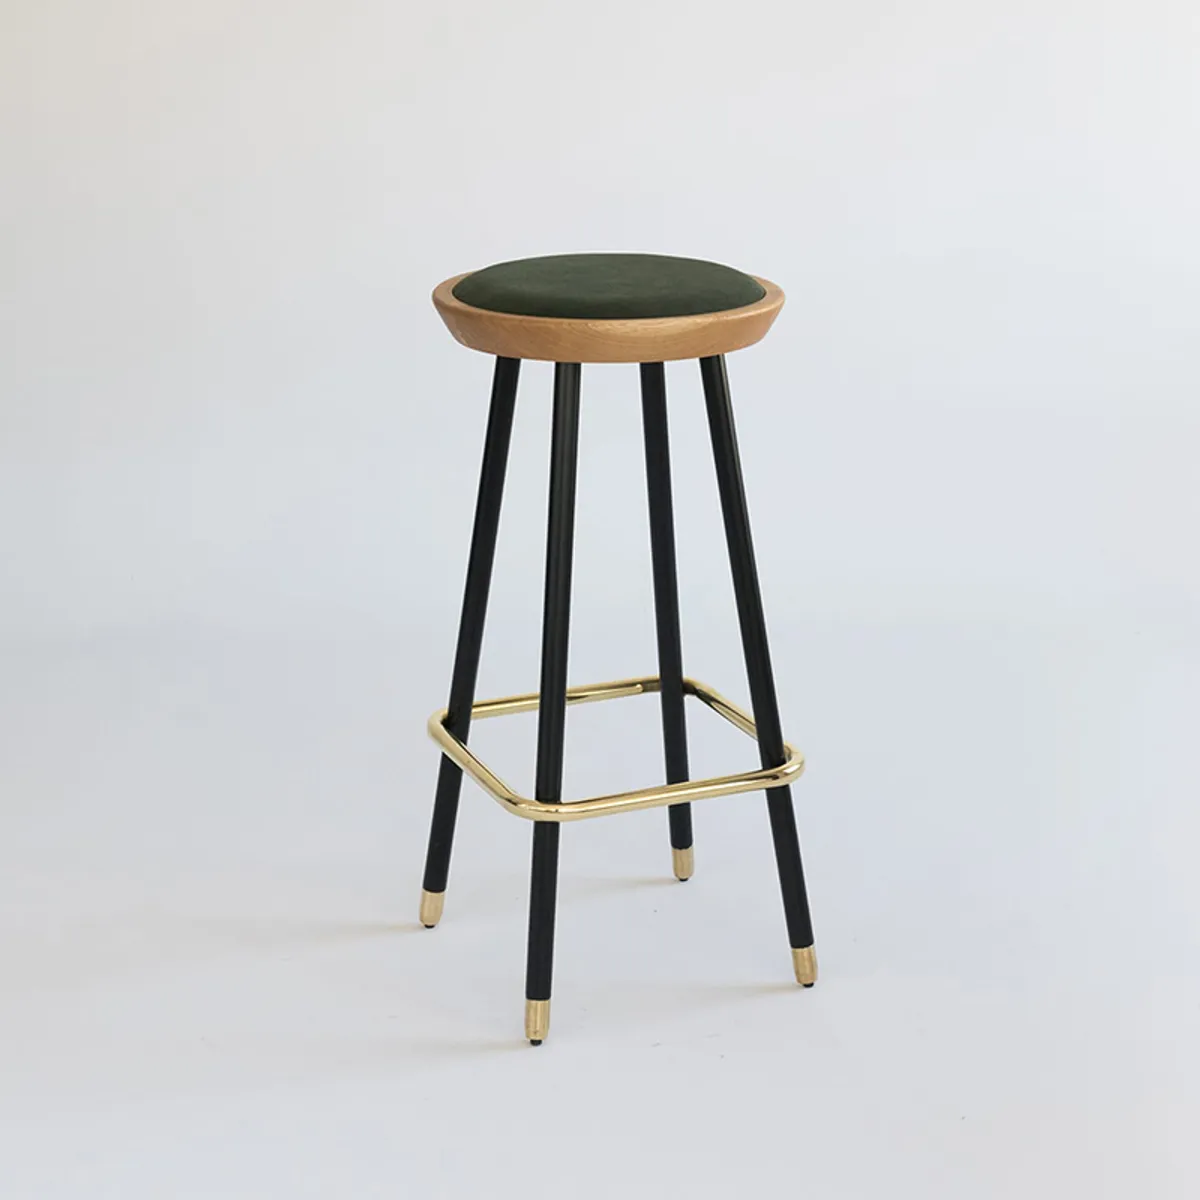 Minsk Stool Four Legged Stool With Slipper Cups And Brass Foot Ring